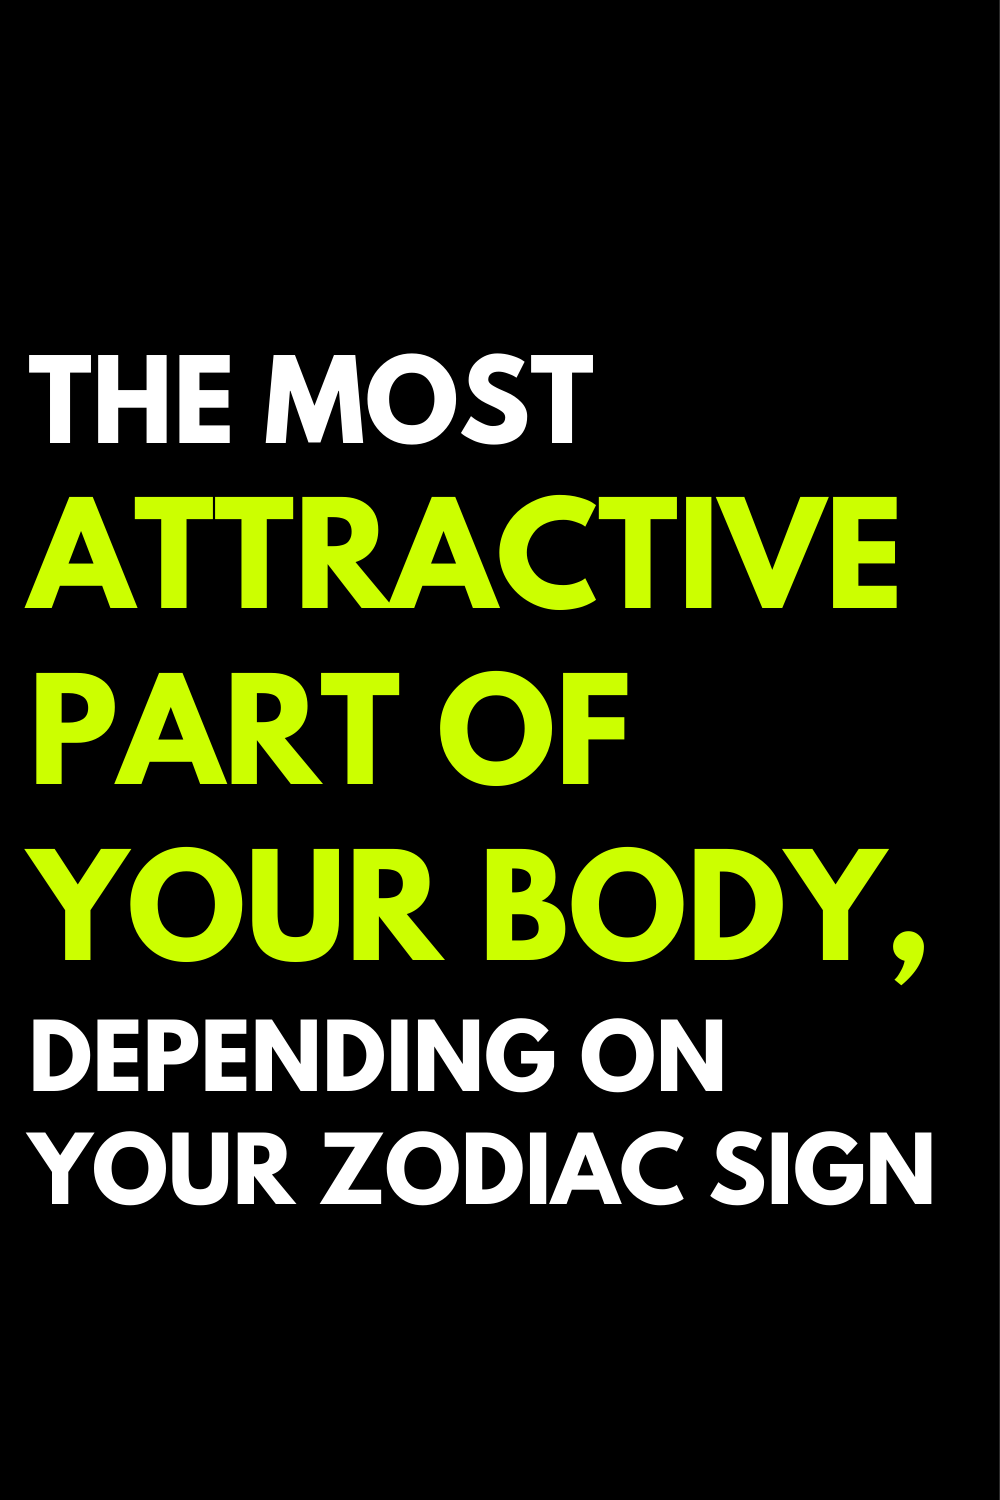 The most attractive part of your body, depending on your zodiac sign